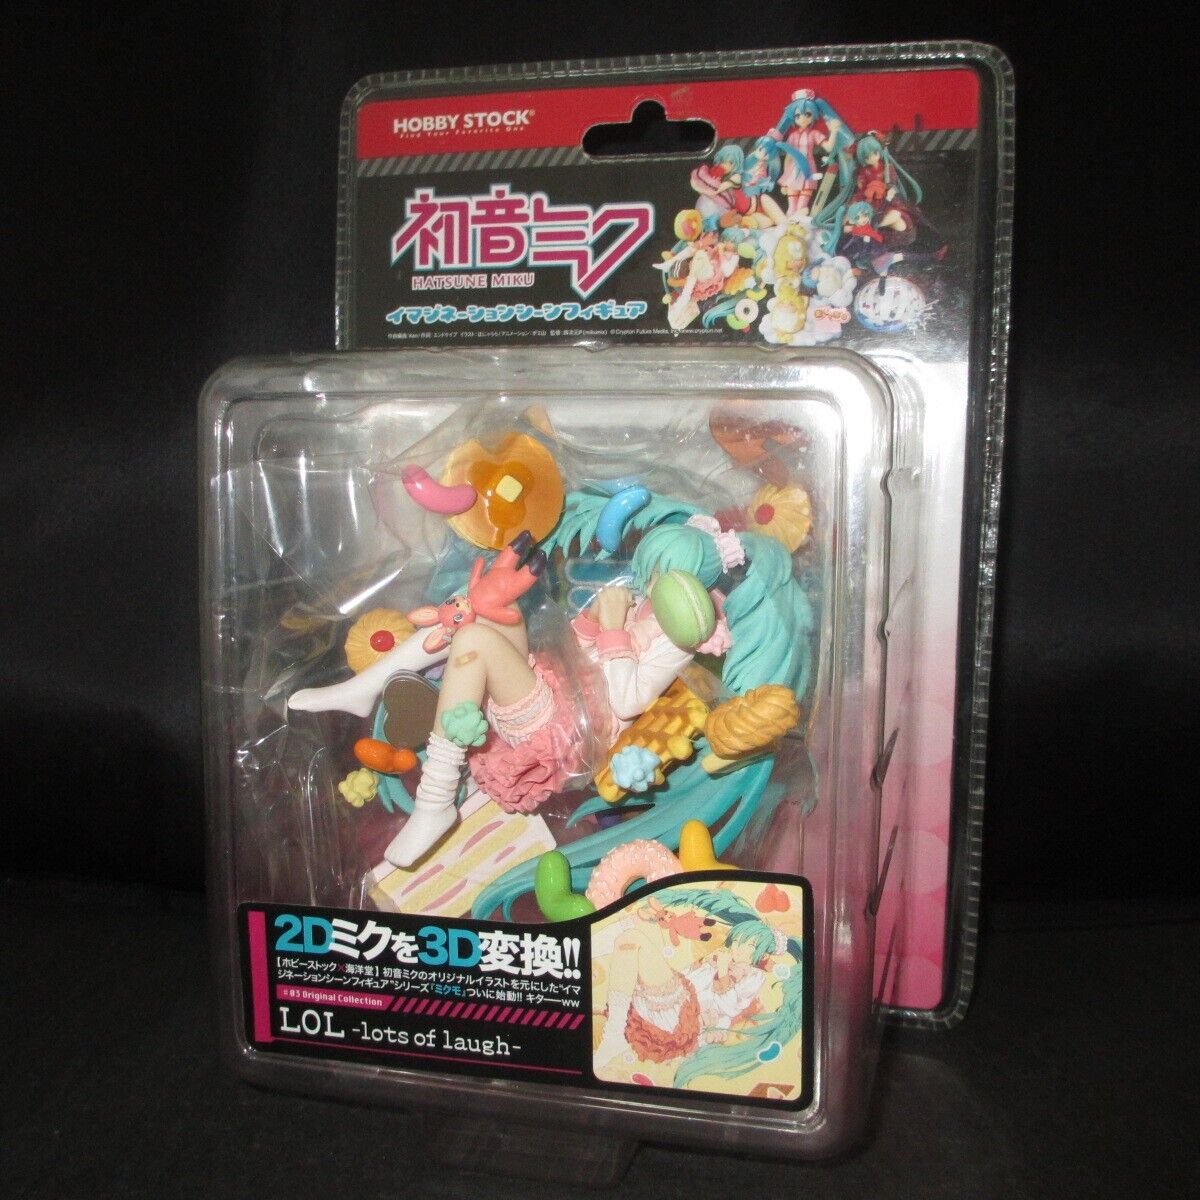 Hatsune Miku Figure Mikumo #03 Lots of Lough Hobby Stock VOCALOID from Japan